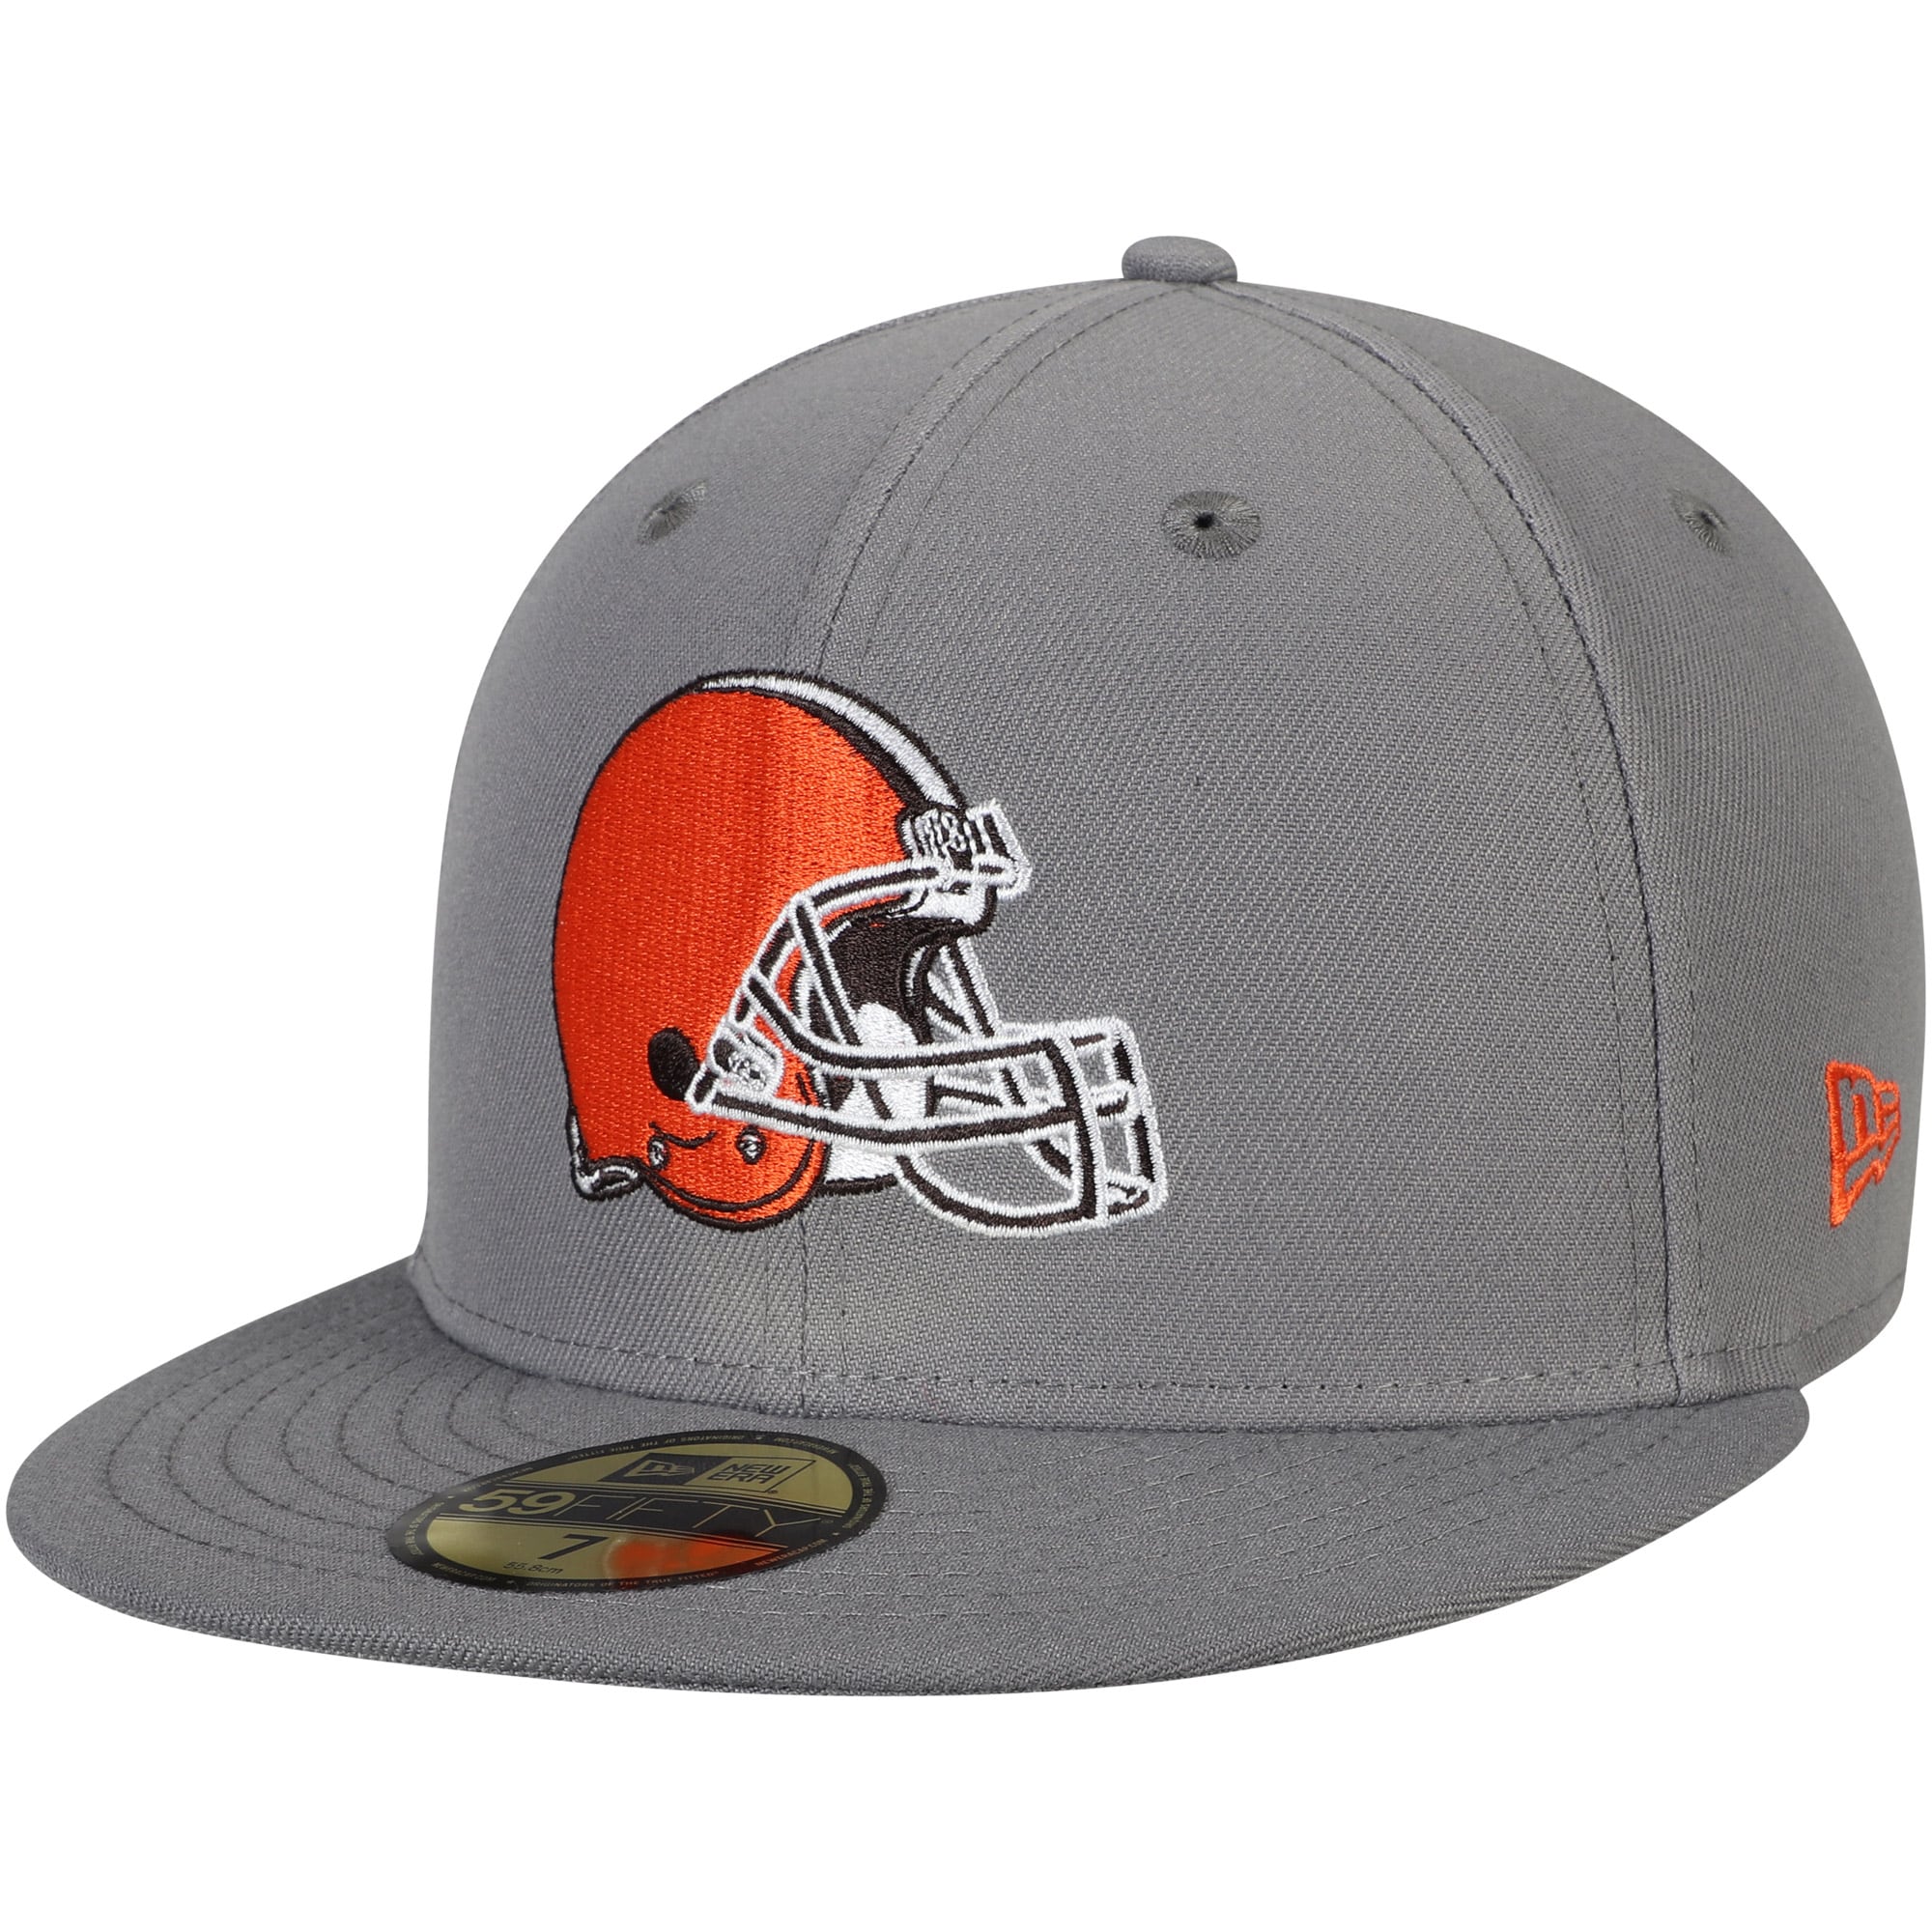 Men's New Era Graphite Cleveland Browns Storm 59FIFTY Fitted Hat - image 1 of 4